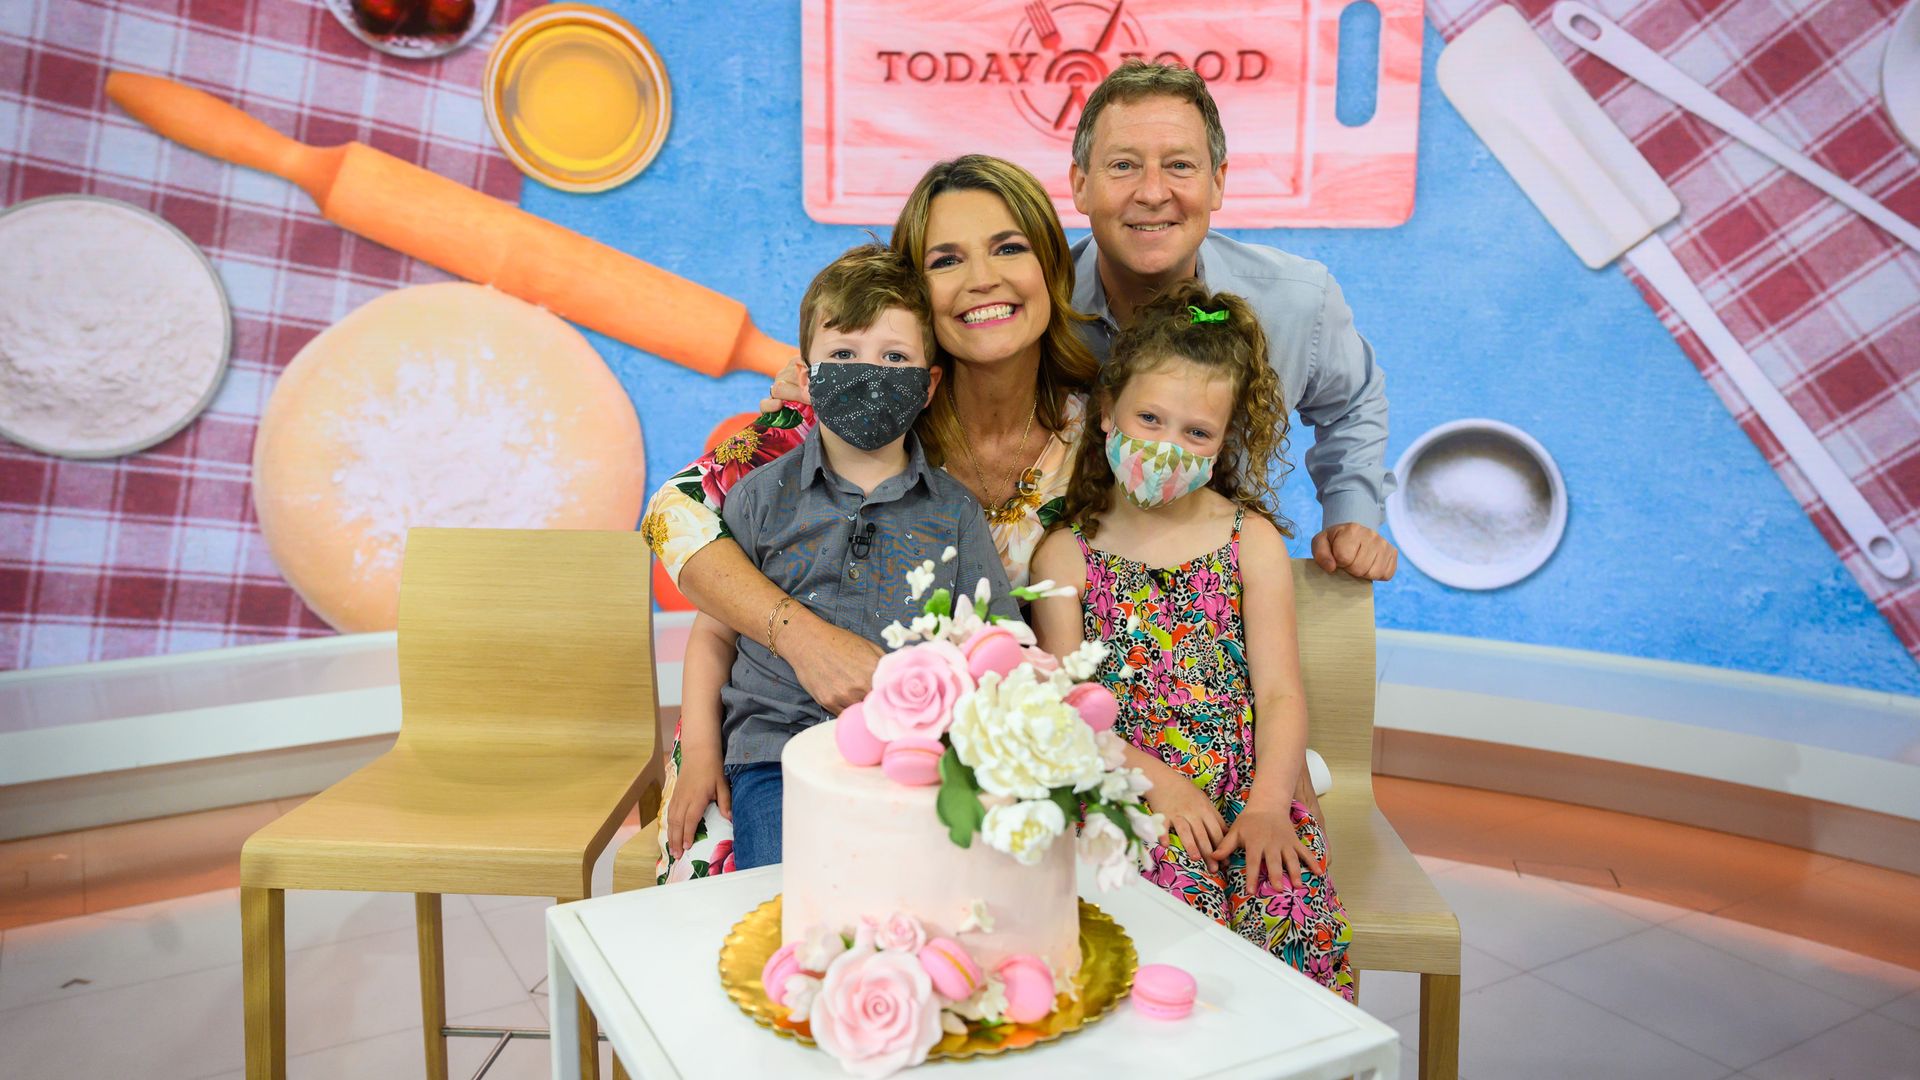 Savannah Guthrie and Michael Feldman with their kids Vale and Charley